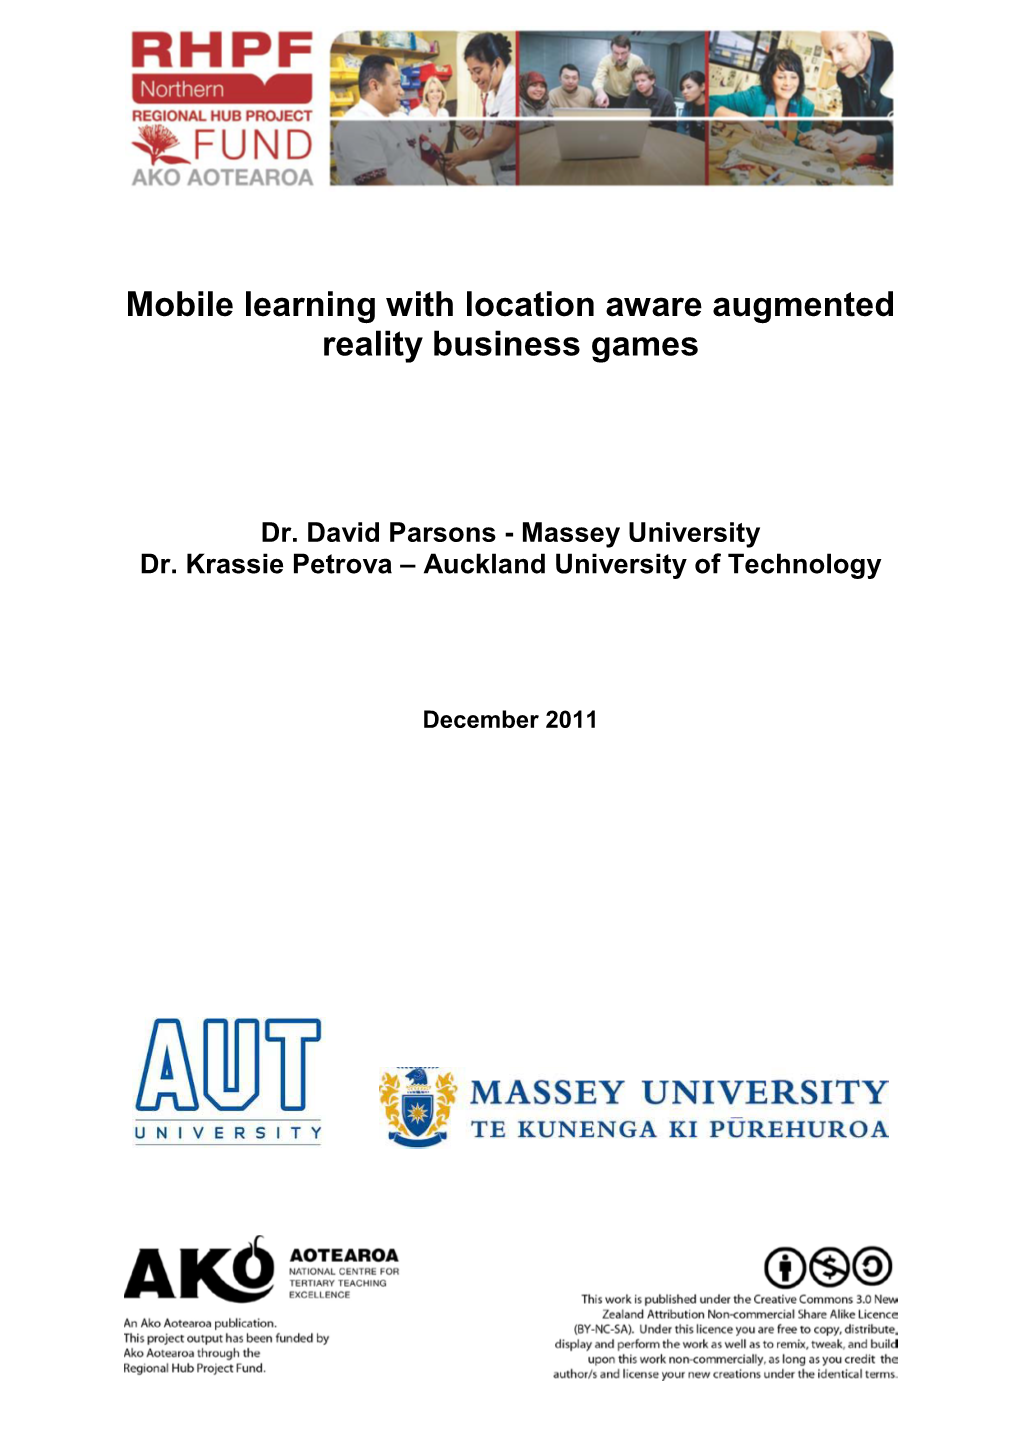 RESEARCH REPORT: Mobile Learning with Location Aware